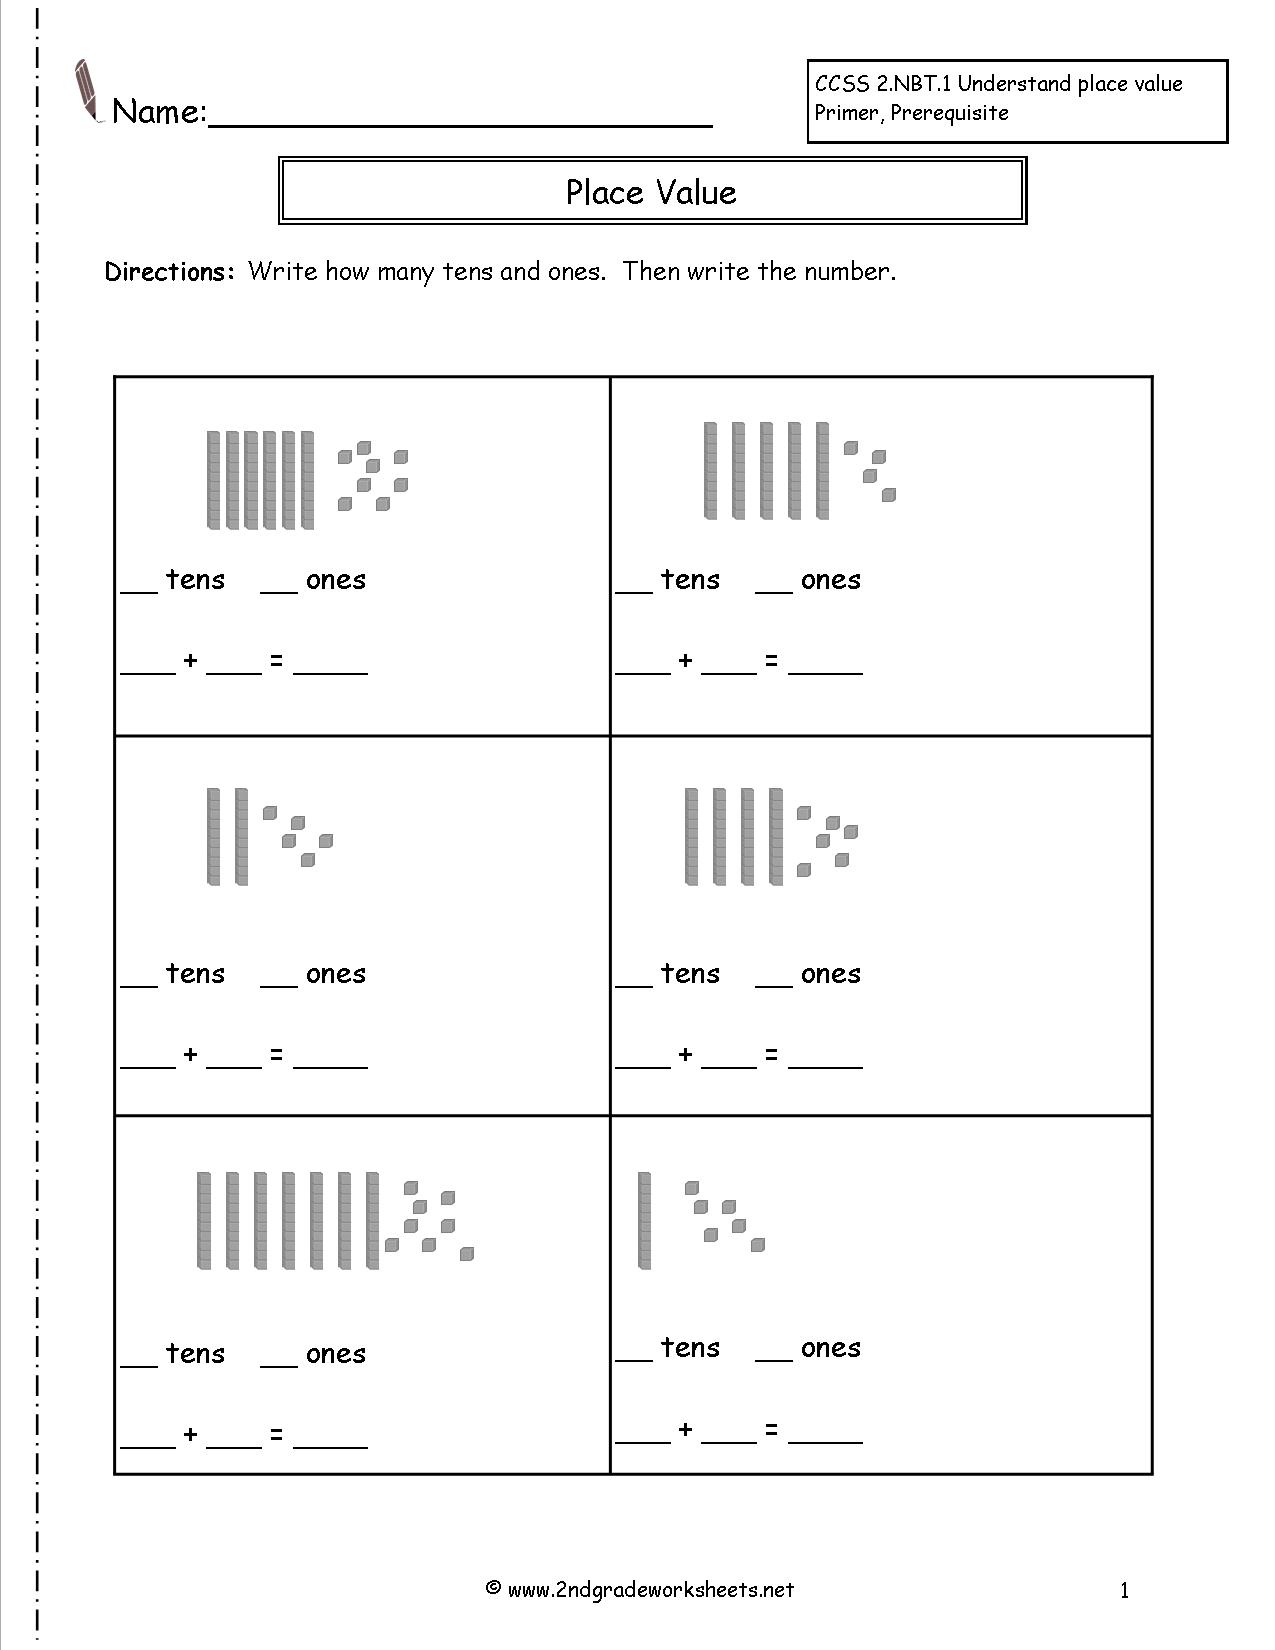 Free Printable Place Value Worksheets For 2Nd Grade Lexia s Blog